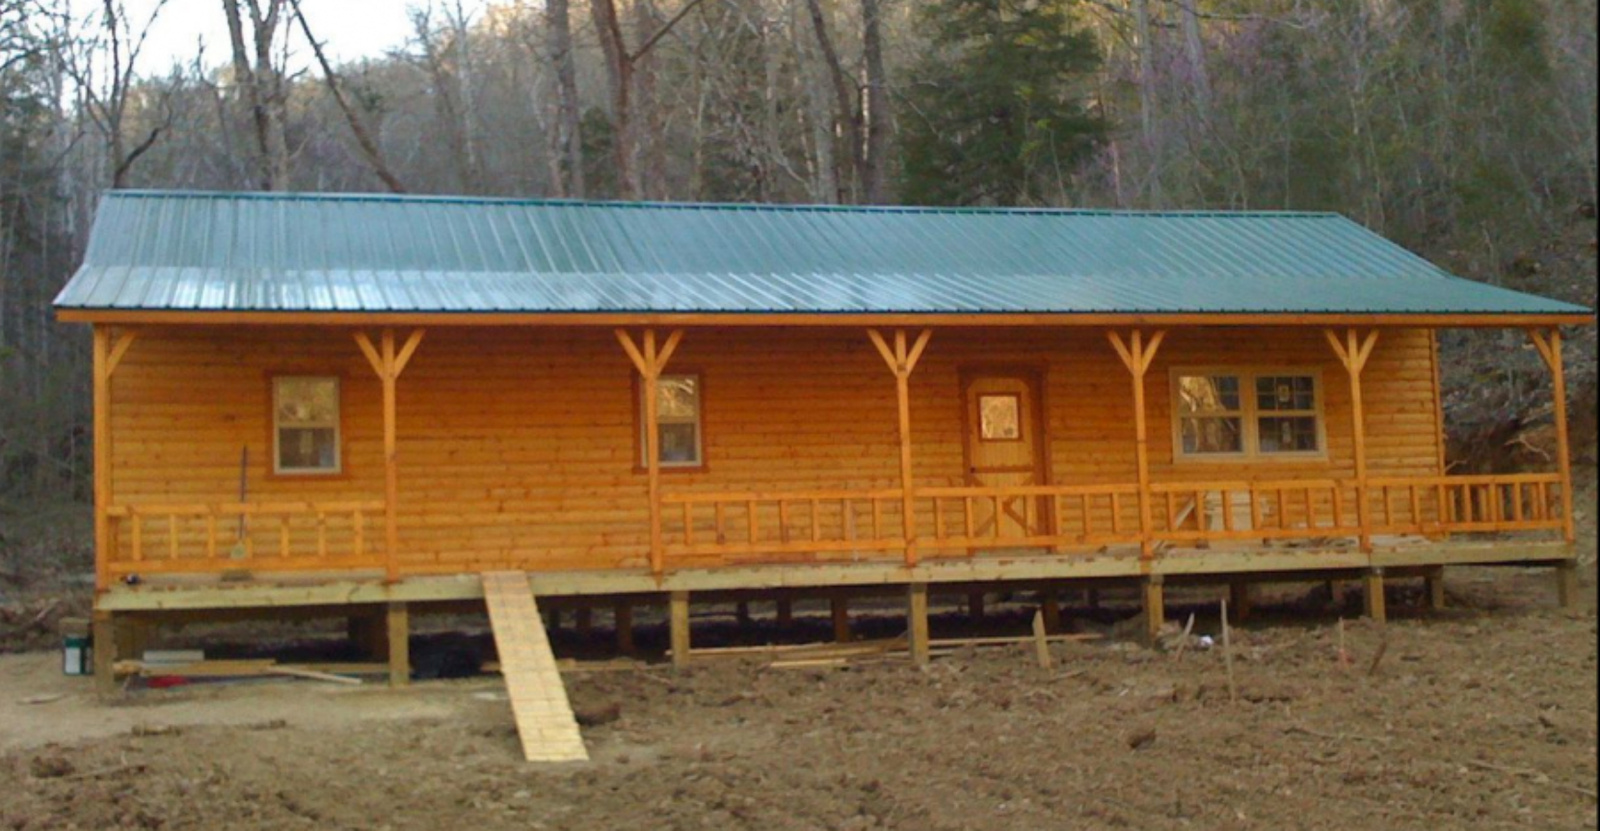 The Mother in Law DIY Kit Package Log Cabin Cottage Starts at $28,600